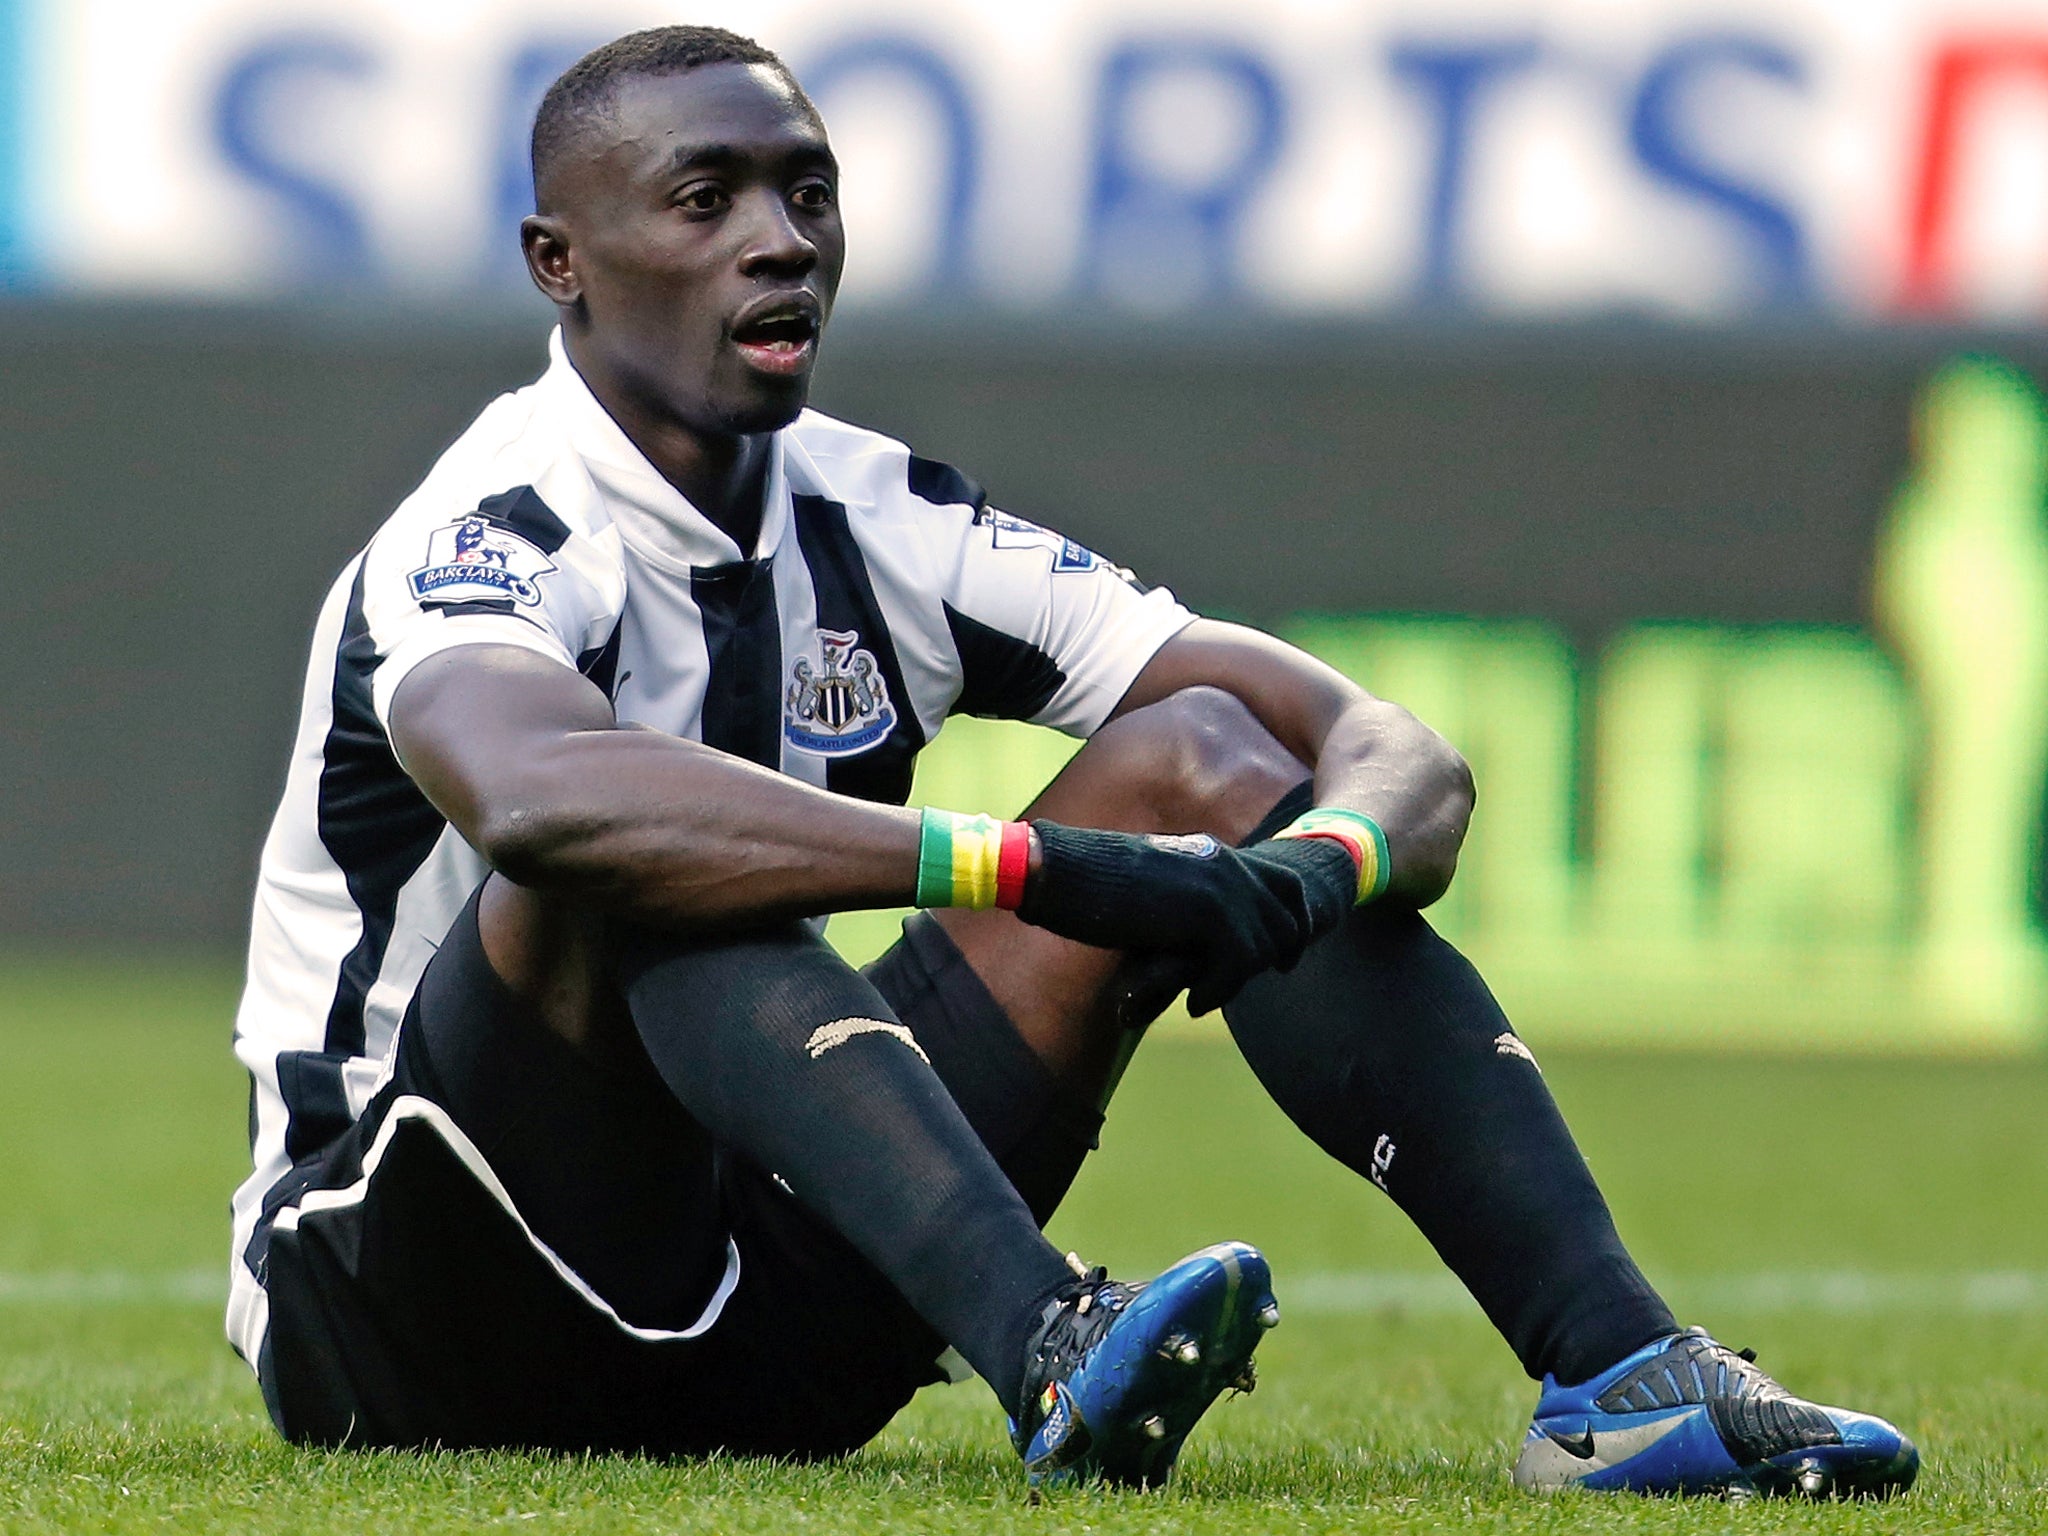 Cisse and Newcastle have been unable to find a compromise